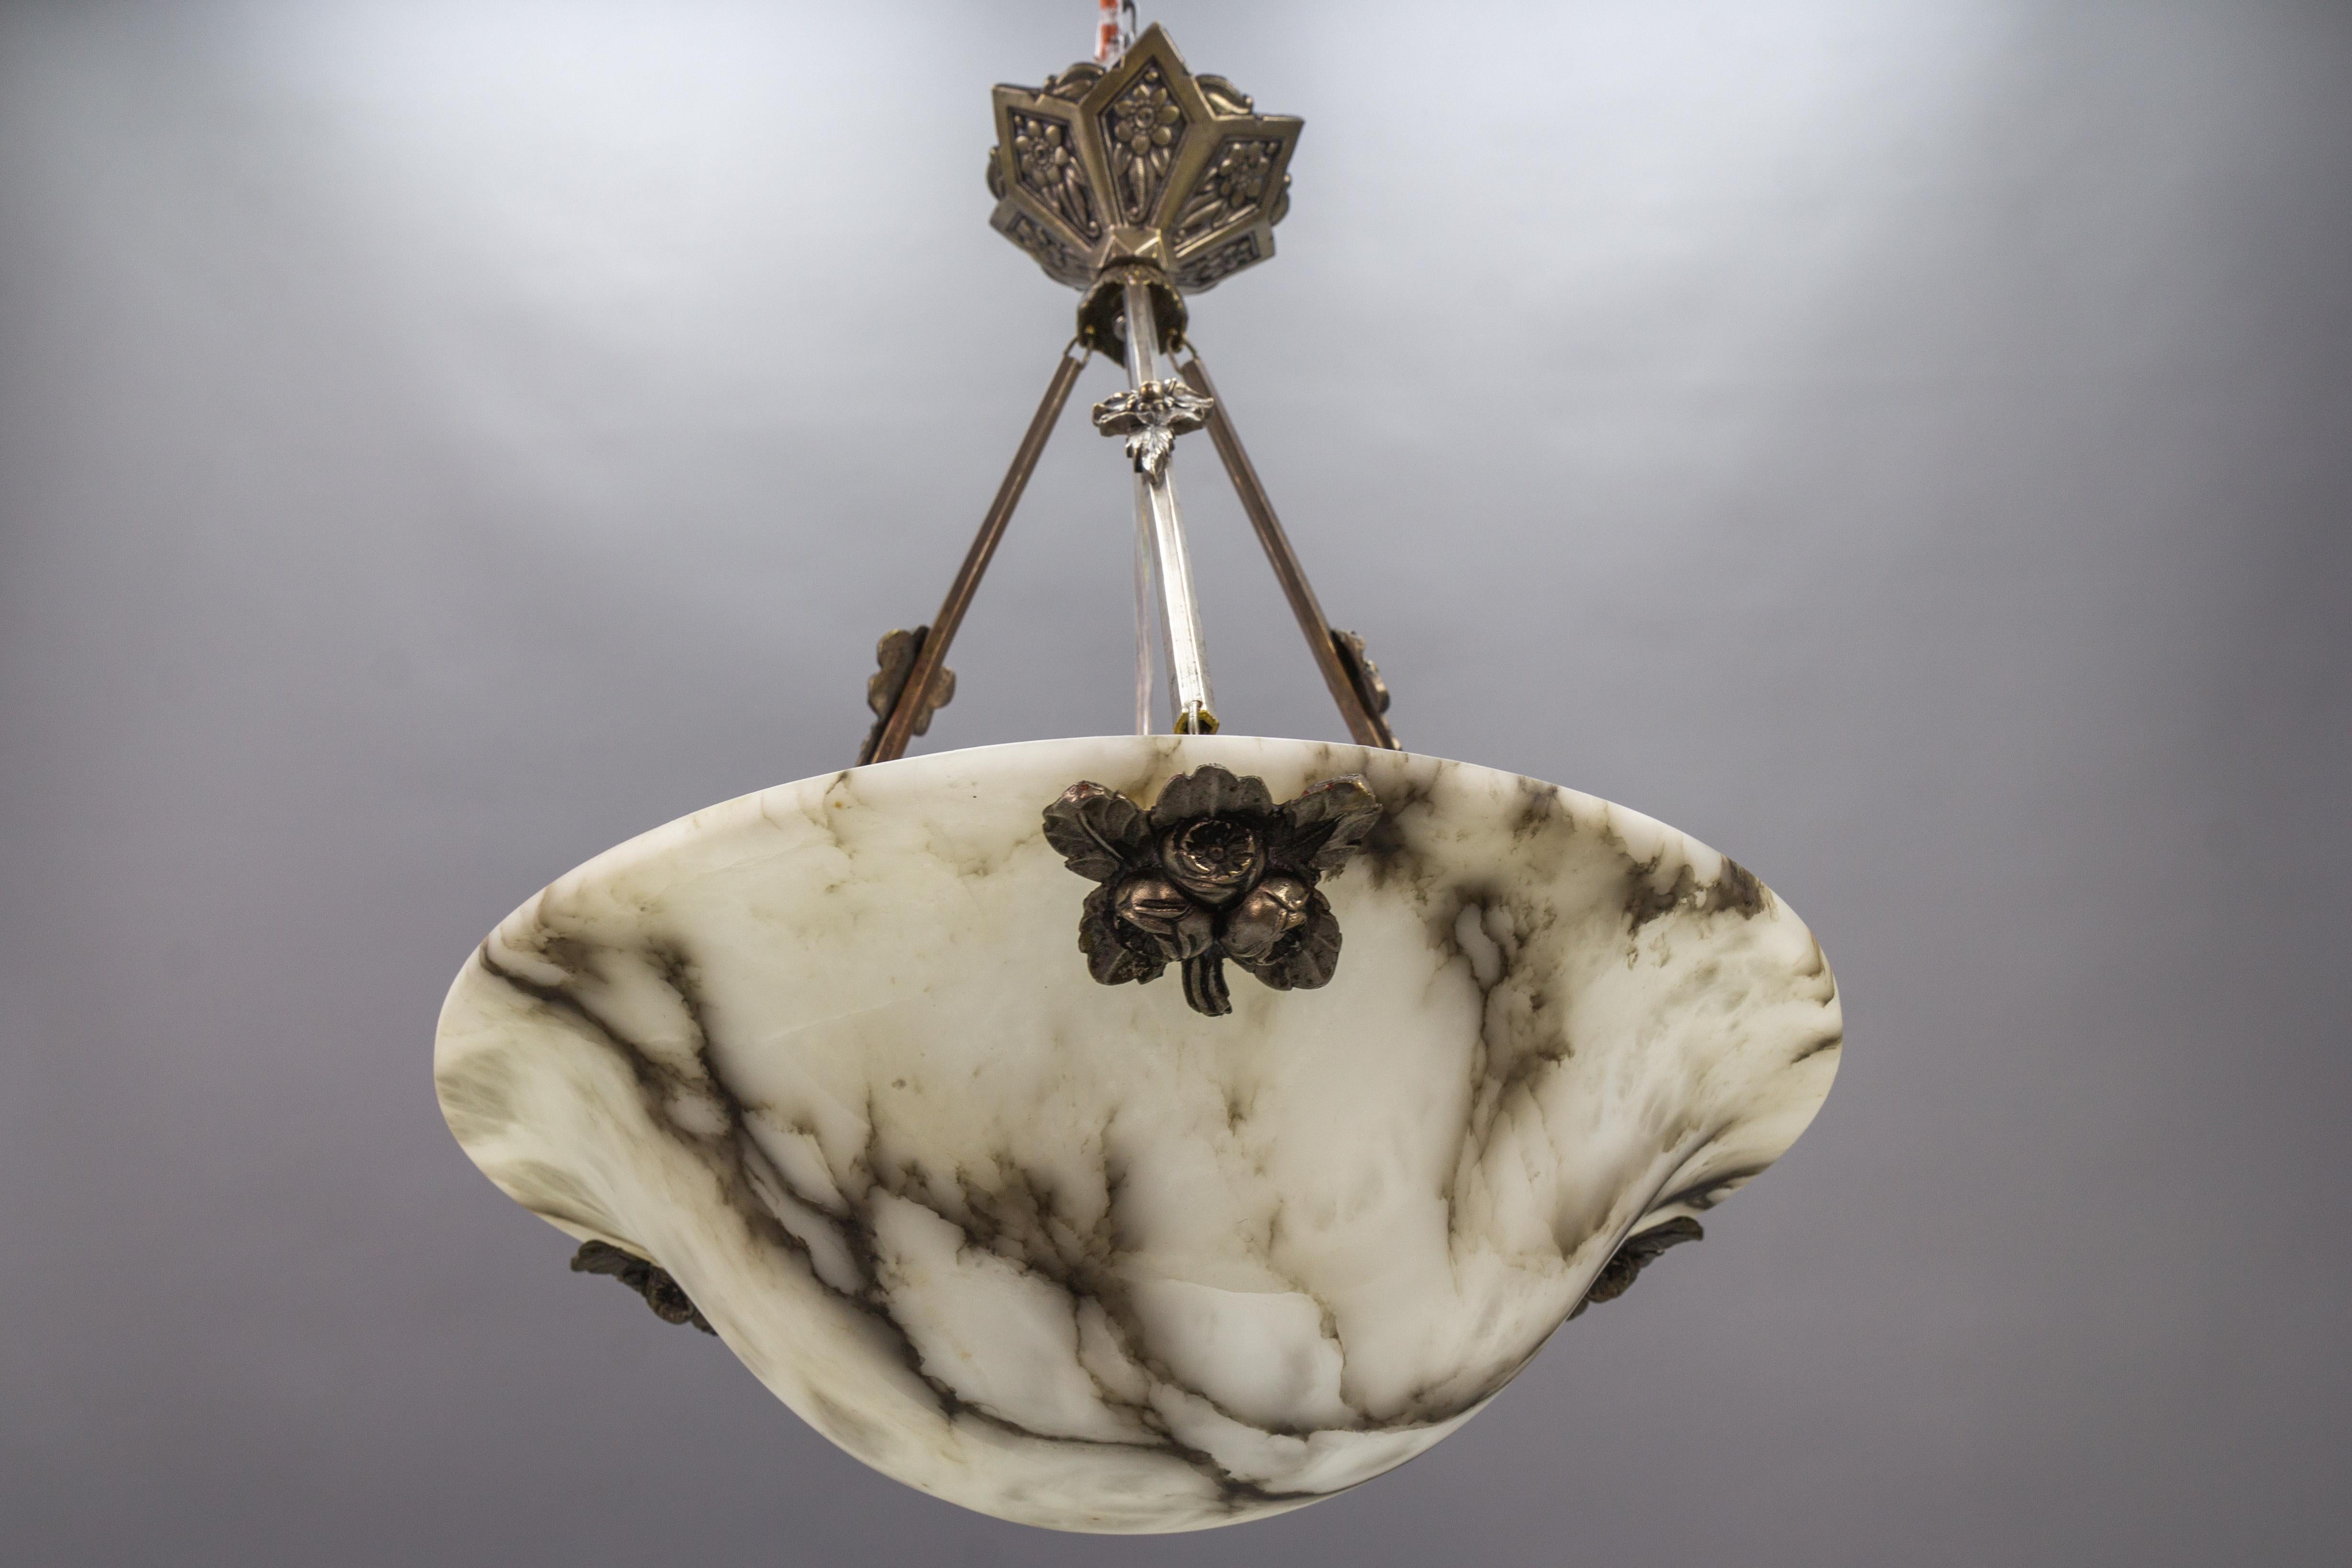 French Art Deco period black veined white alabaster pendant light fixture.
A wonderful alabaster pendant ceiling light fixture from circa the 1920s. Beautifully veined and masterfully carved white alabaster bowl suspended by chromed brass fixture